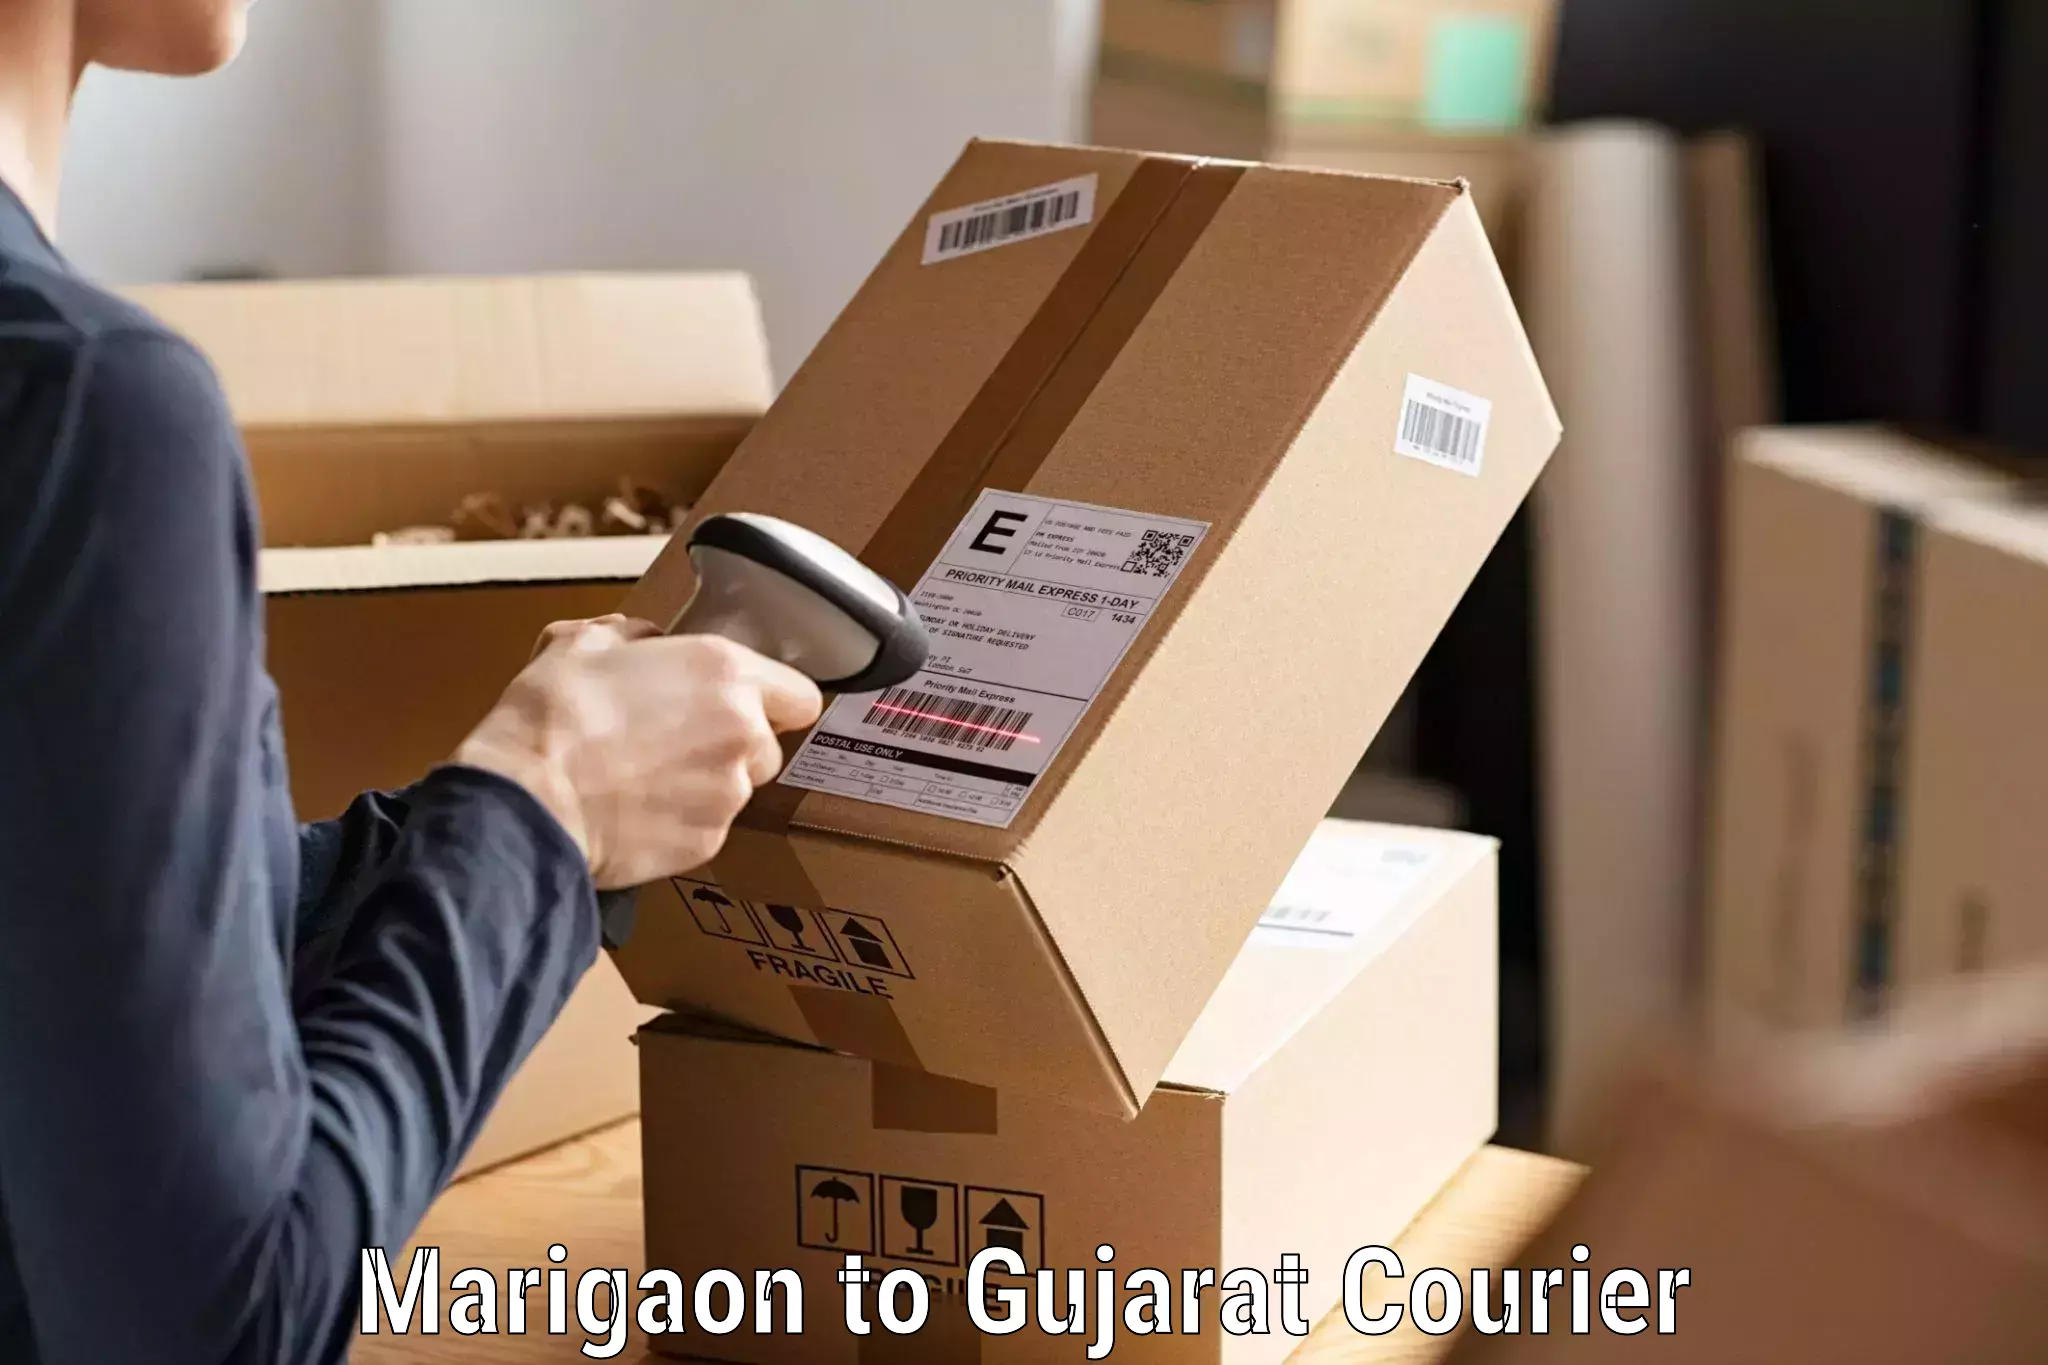 Custom courier packaging Marigaon to Ahmedabad